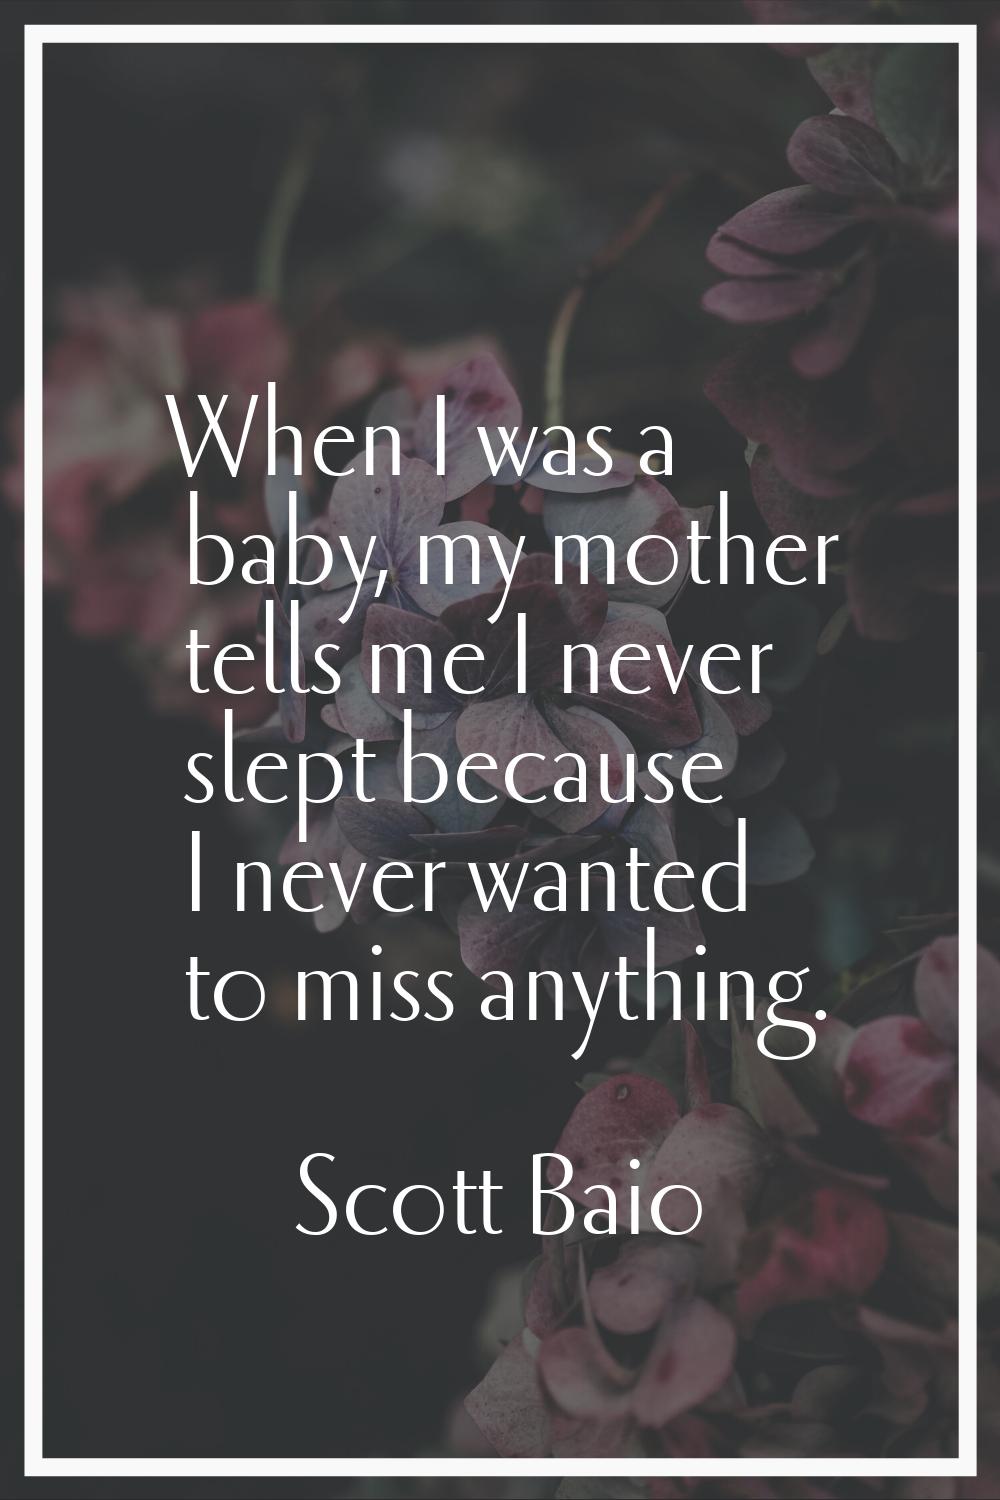 When I was a baby, my mother tells me I never slept because I never wanted to miss anything.